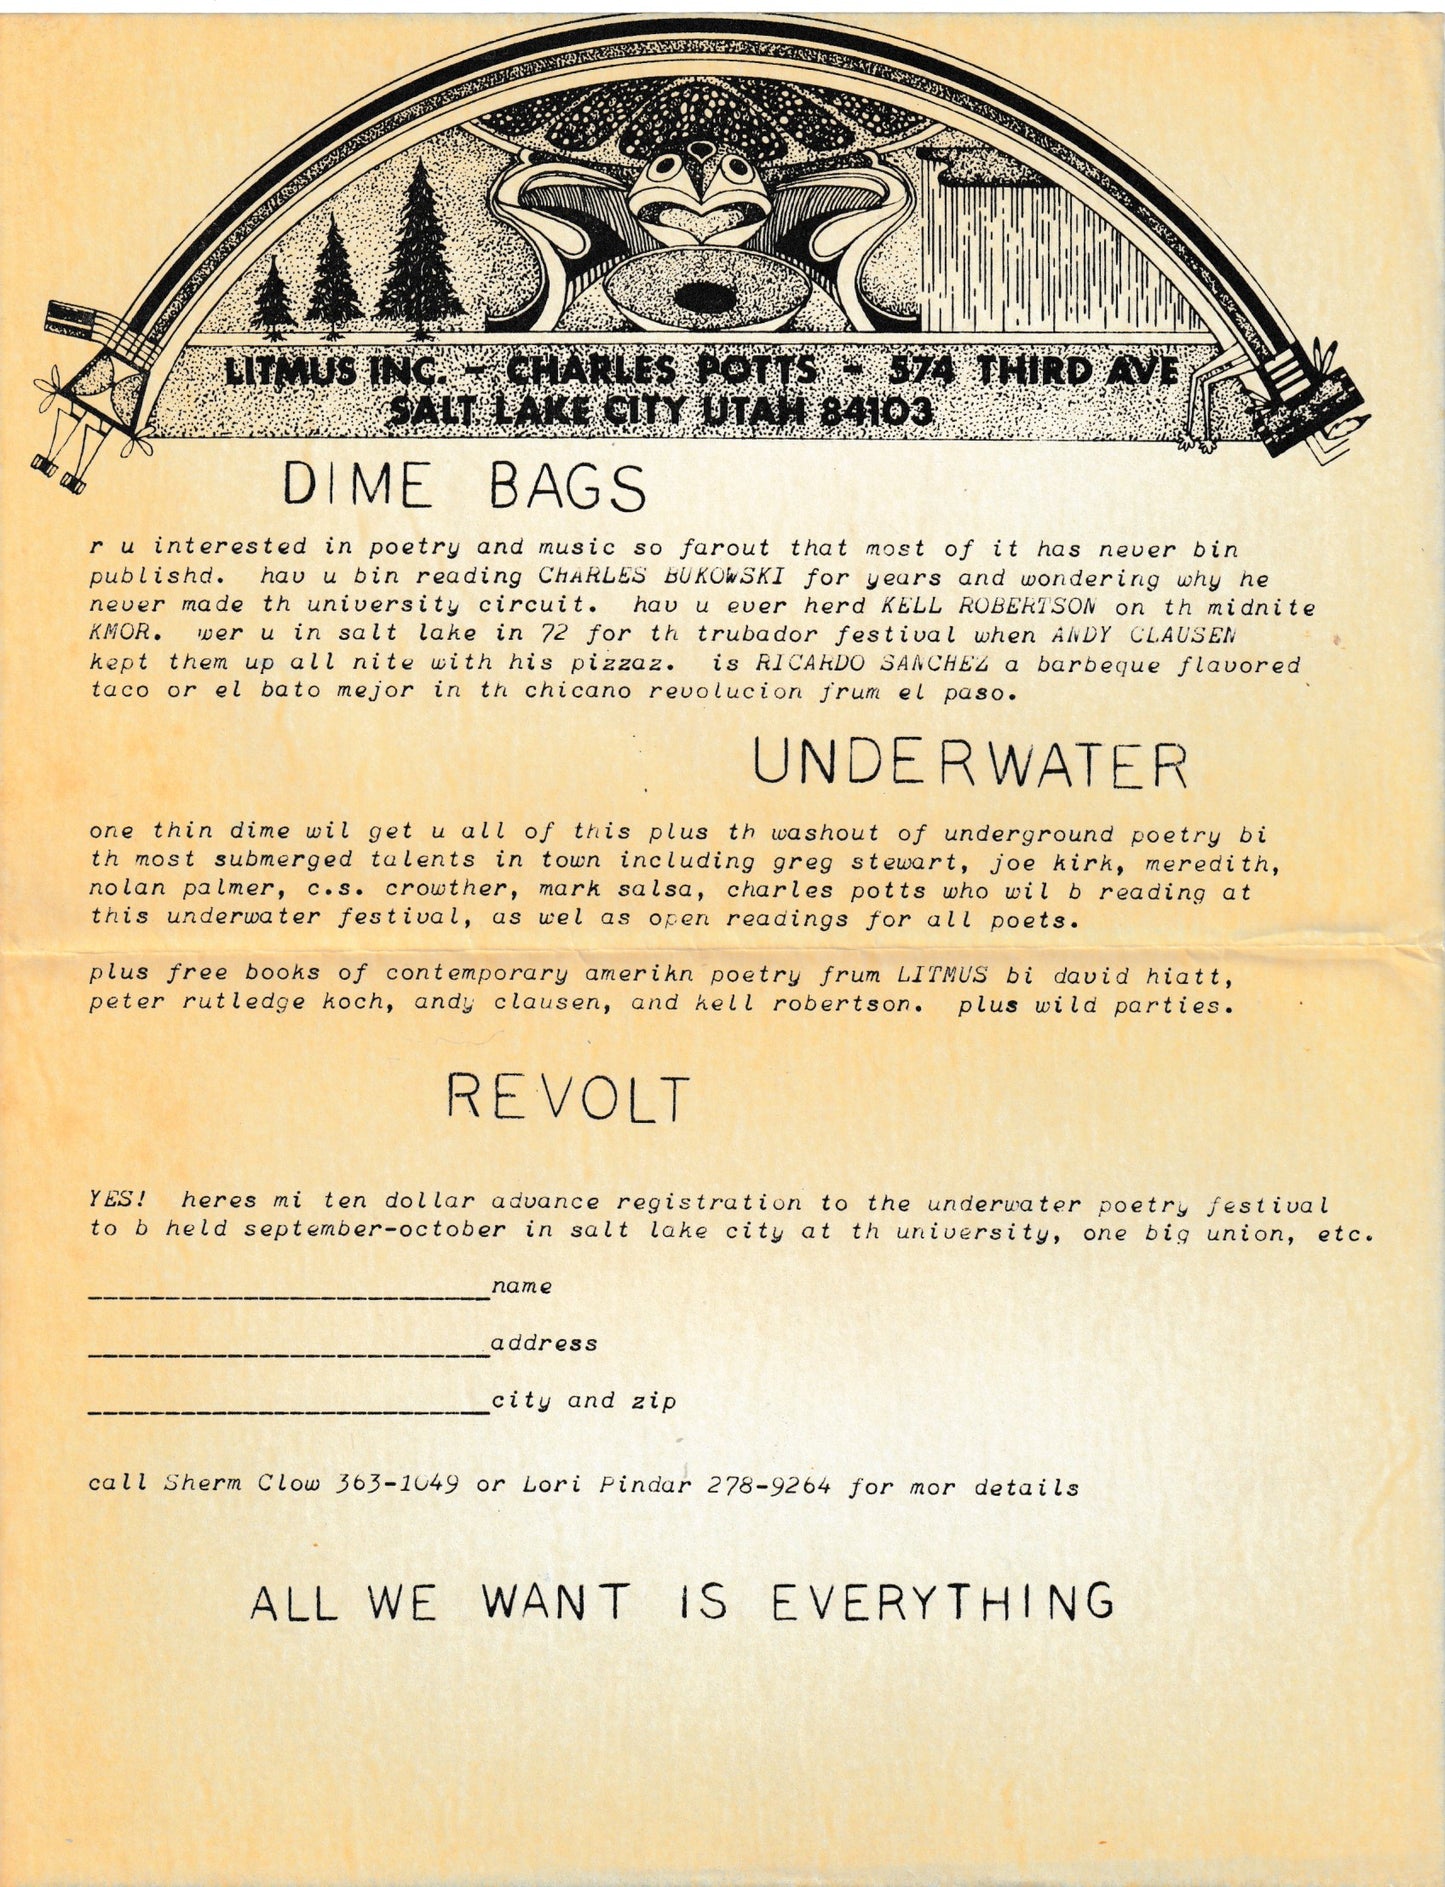 Flyer and CD for Bukowski Reading at the Underwater Poetry Festival (1974)